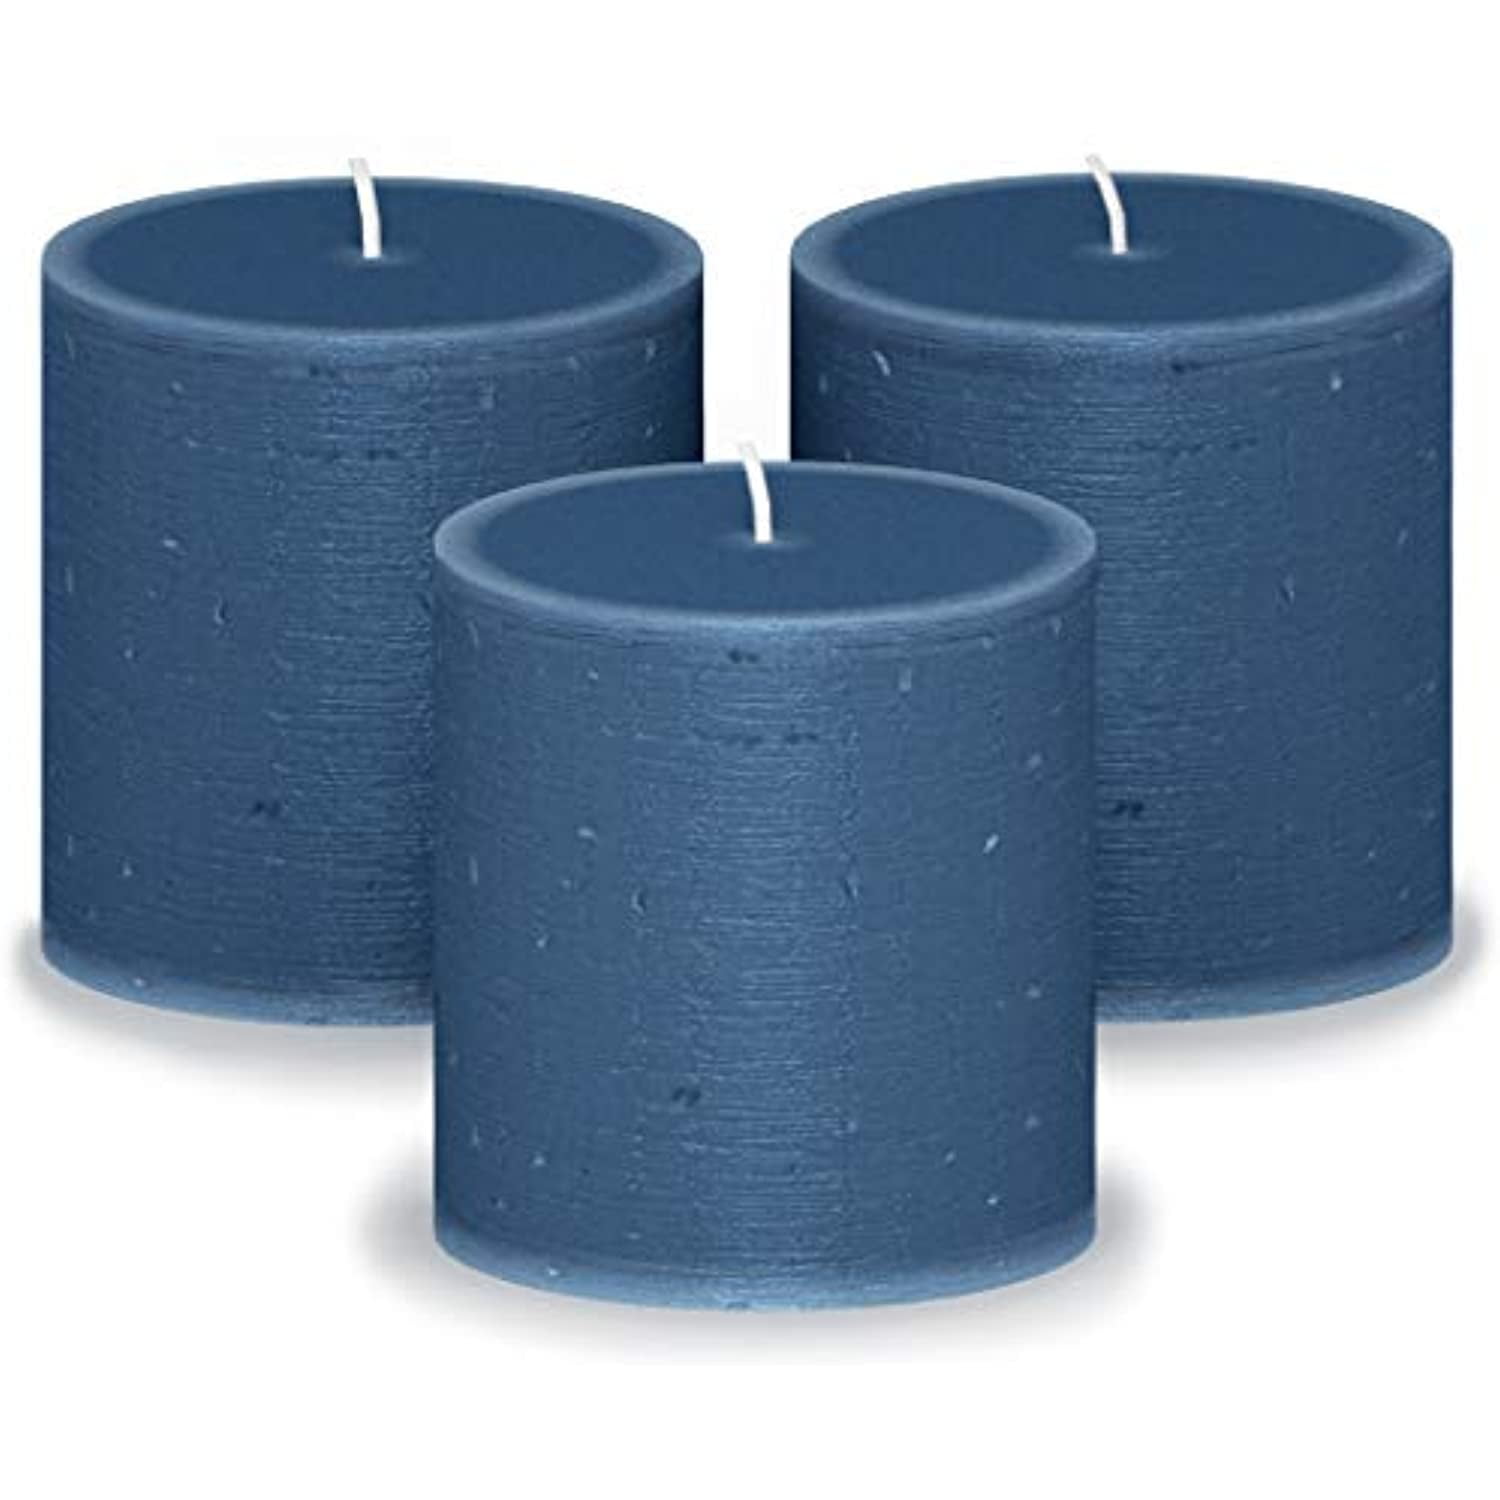 Decorative Rustic Candles Unscented and No Drip Candles Ideal as Wedding Candles or Large Candles for Home Interior CANDWAX 3x8 Pillar Candle Set of 2 Blue Candles